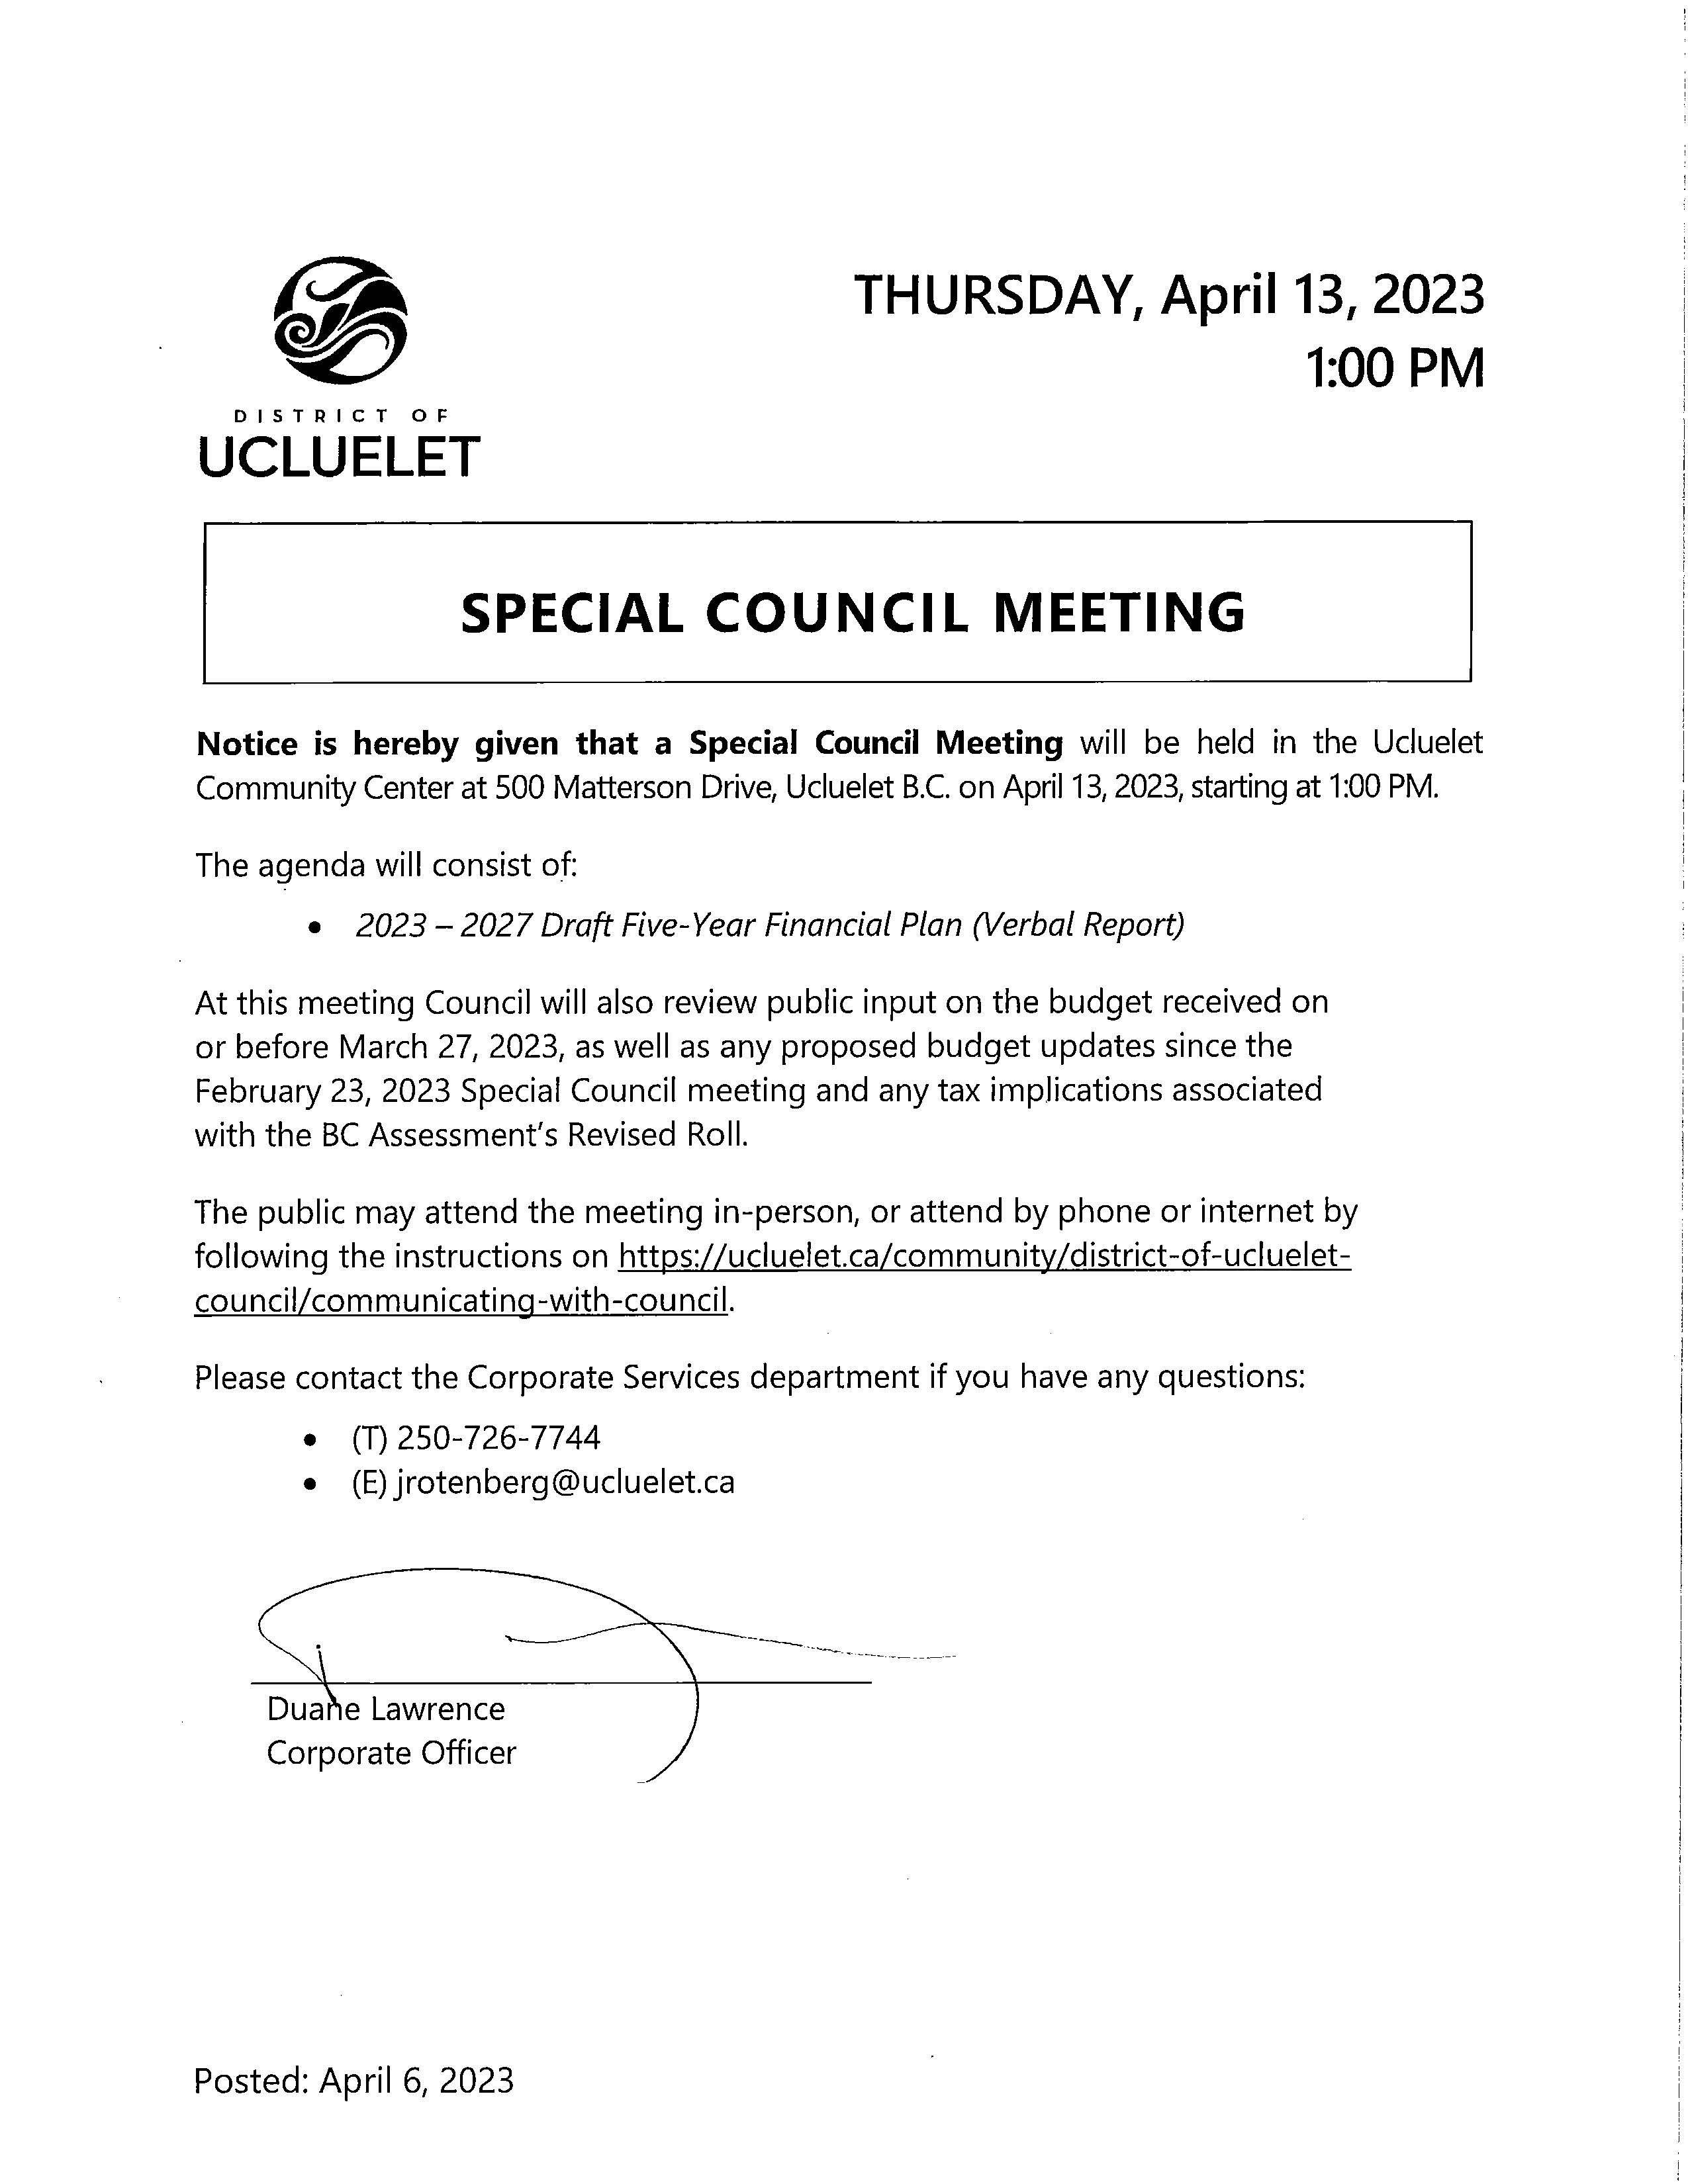 2023-04-13_Notice_of_Special_Council_Meeting.jpg